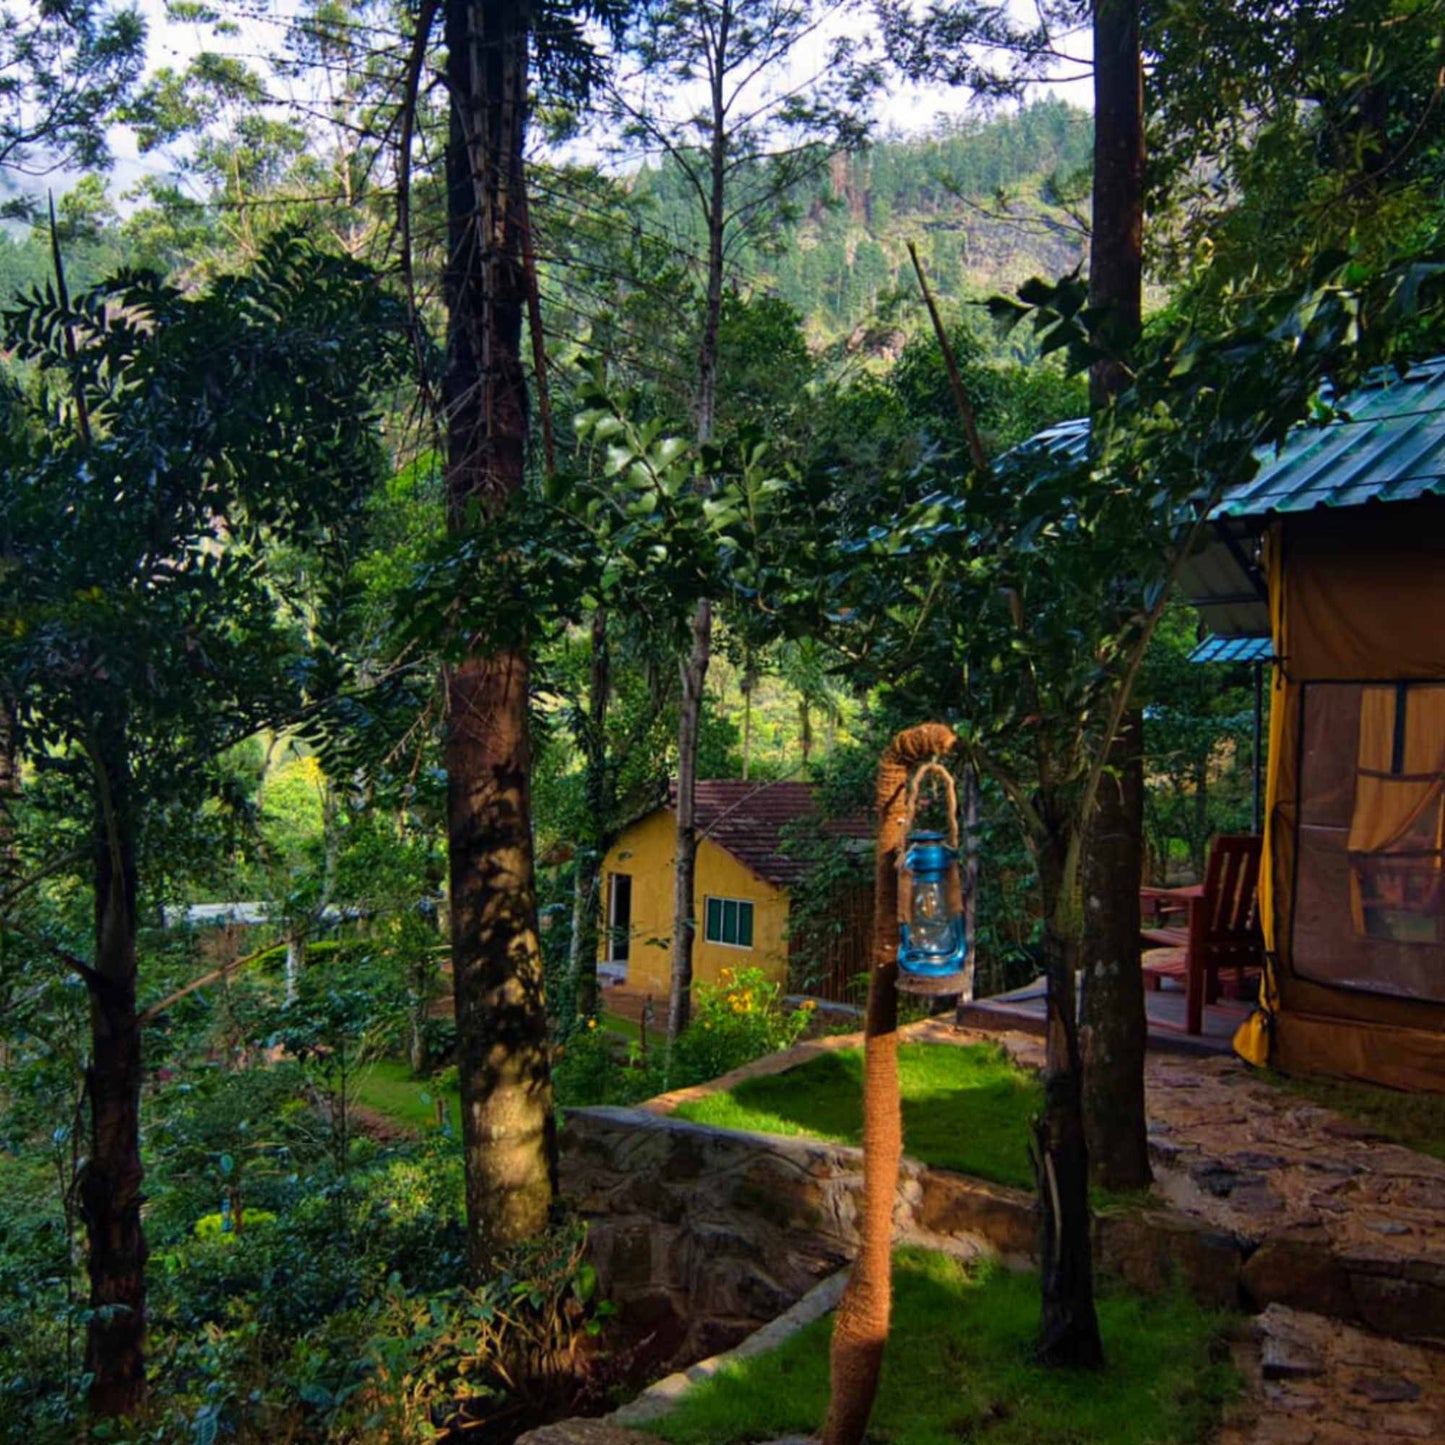 41% OFF: Buy 2 Nights and 3 Days Stay and get an additional 1 Night stay FREE with Bed & Breakfast for 2 people. Waterfall Hike + River Hike & Secret Waterfall Exploring Included